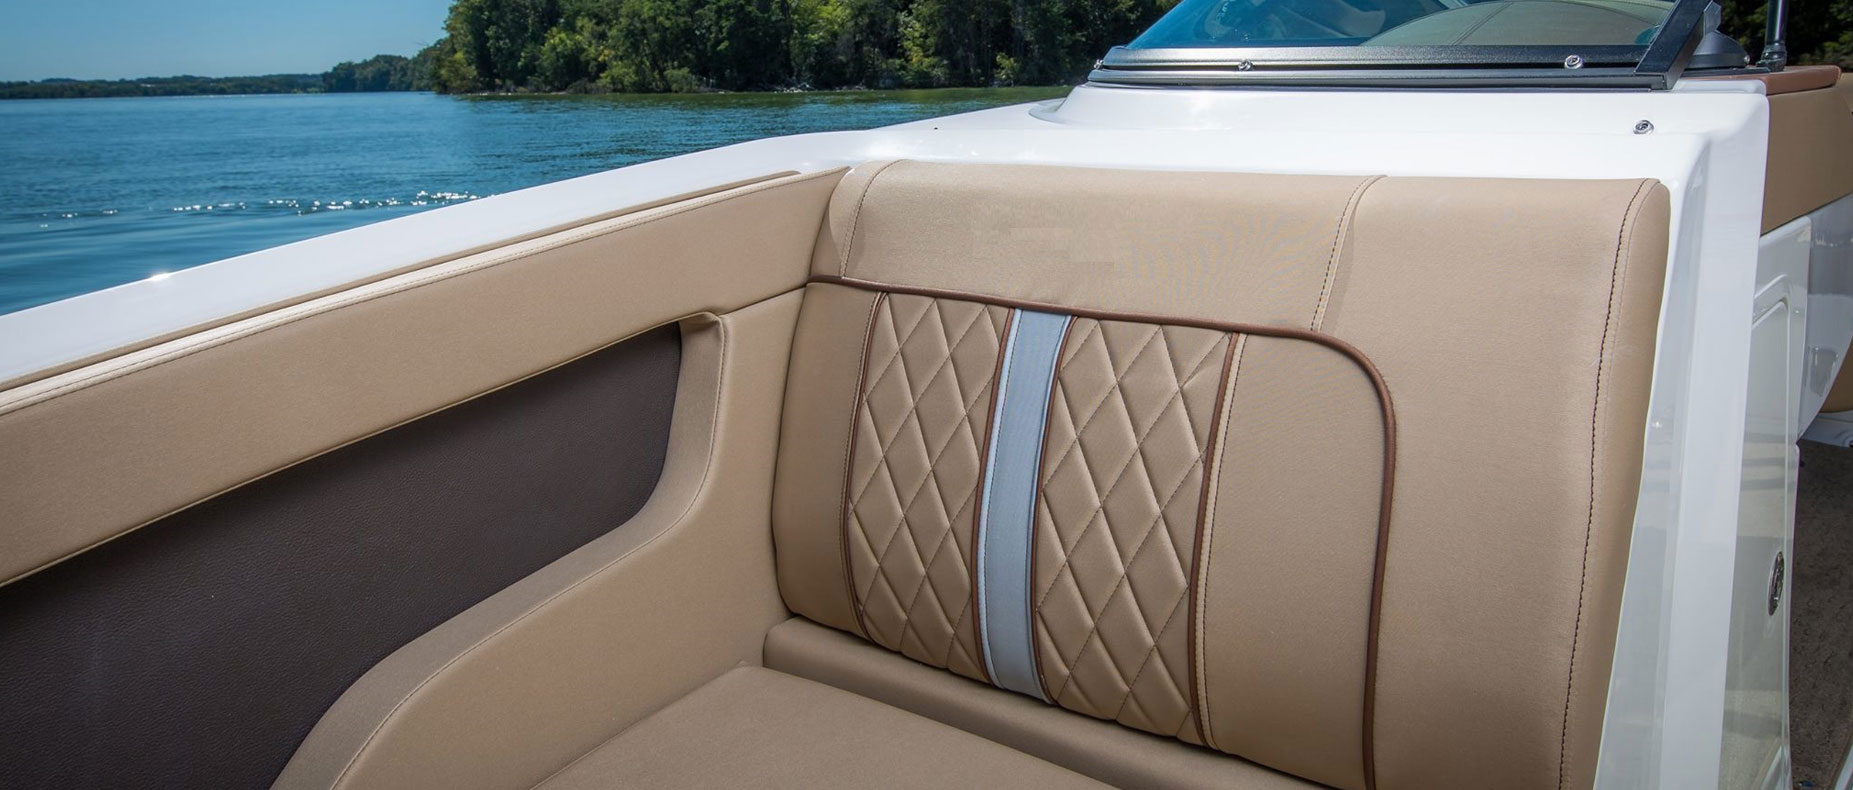 Cost To Recover Pontoon Boat Seats | Brokeasshome.com